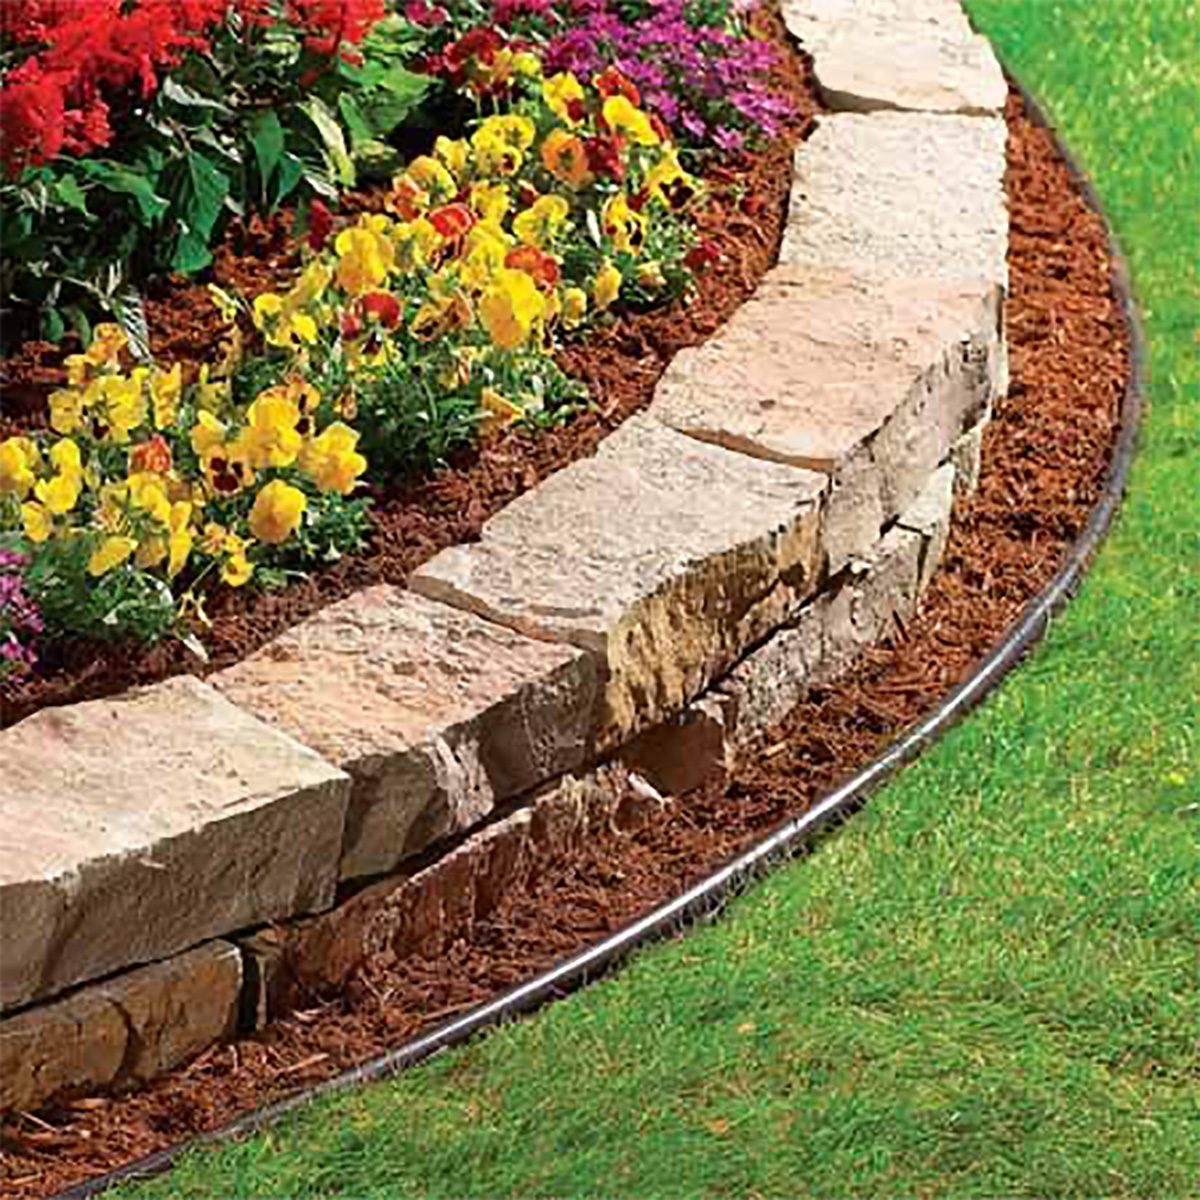 Do's and don'ts of landscaping edging